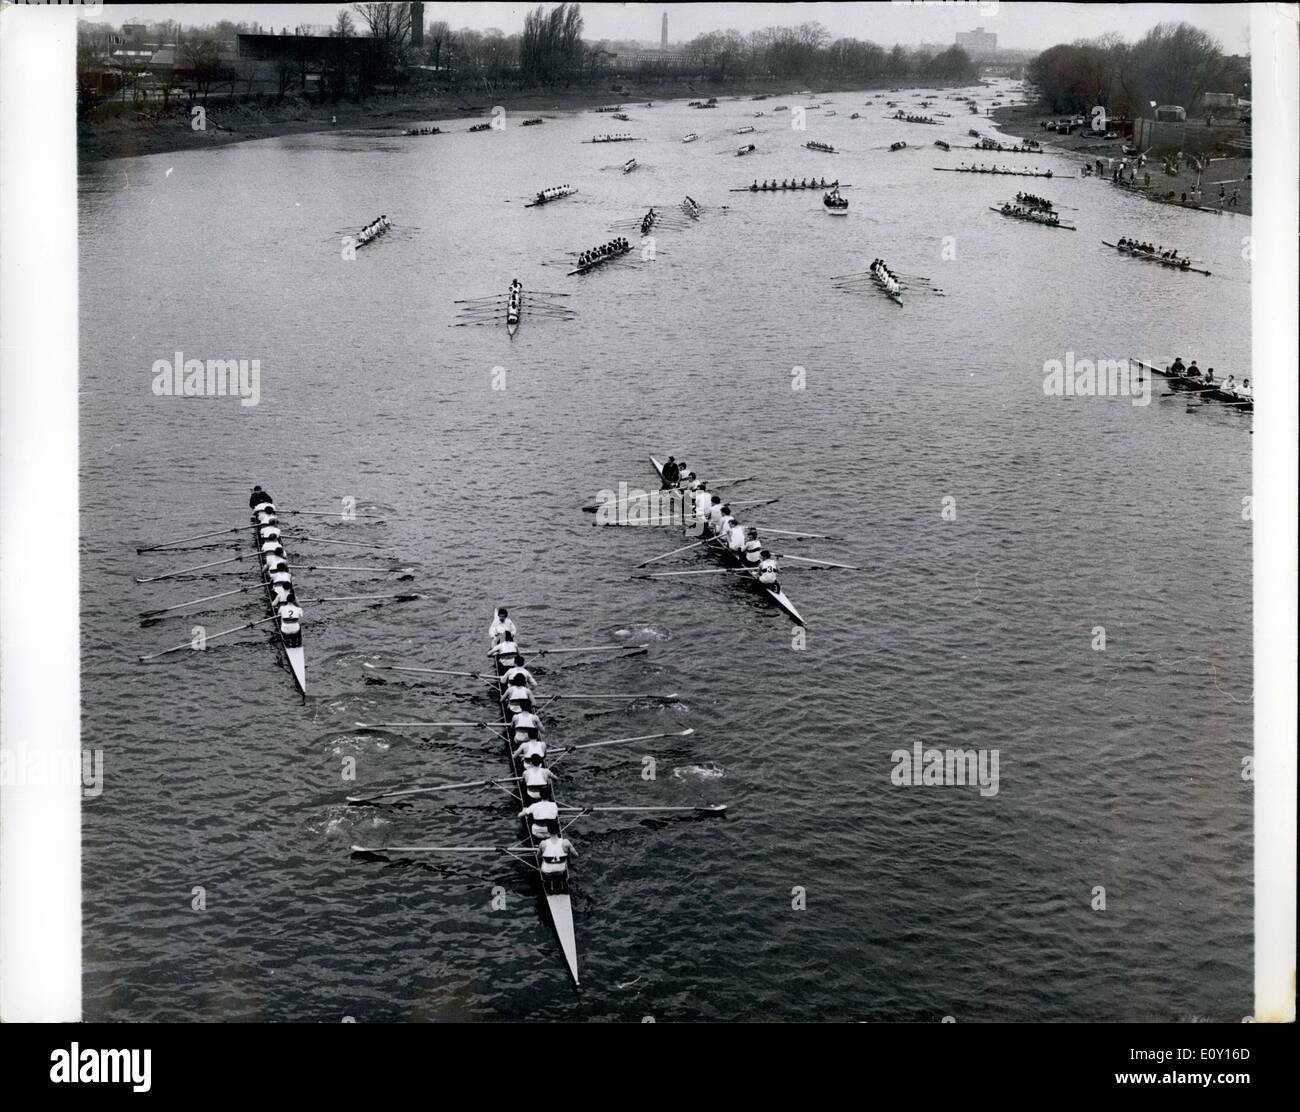 Mar. 03, 1968 - 373 Crews take part in the head of the river race: The phenomenal number of 373 crews took part in the annual Head of the river race which was rowed over the boat race course in reverse - from Mortlake to Putney today. Photo shows: A view from Chiewick Bridge showing the crews moving off from Mortlake soon after the start of the race today. Stock Photo